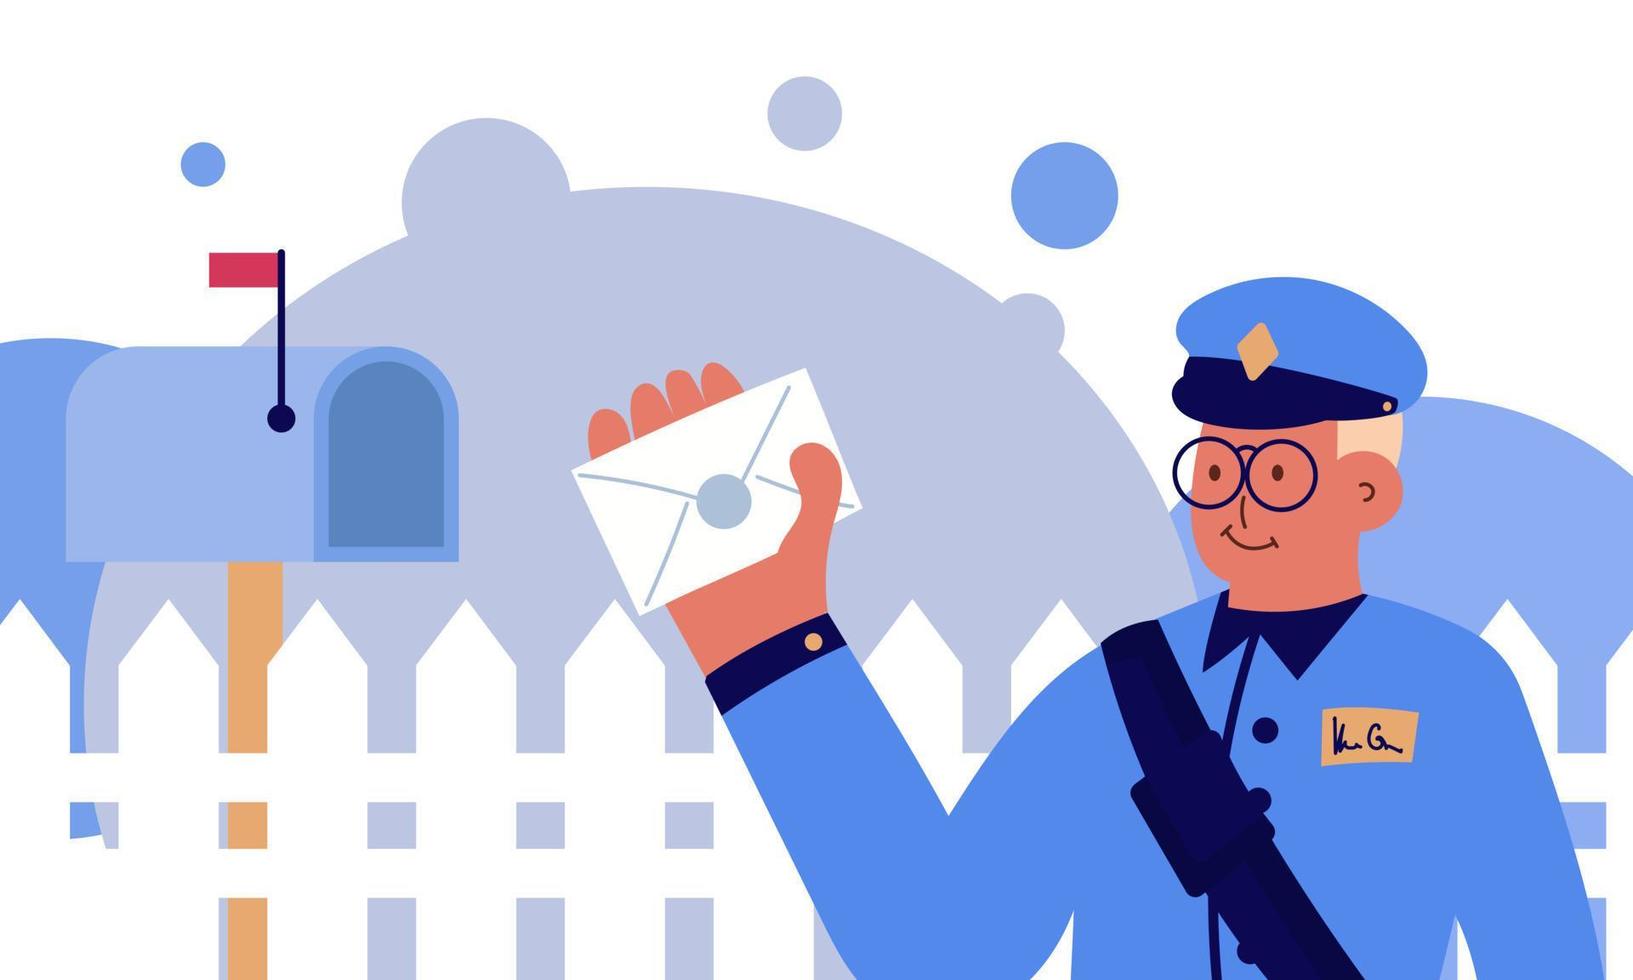 Postman office post and express service. Mailman delivery correspondence to mailbox and envelope vector illustration. Courier cartoon and documents logistics. Cheerful postal character with suit